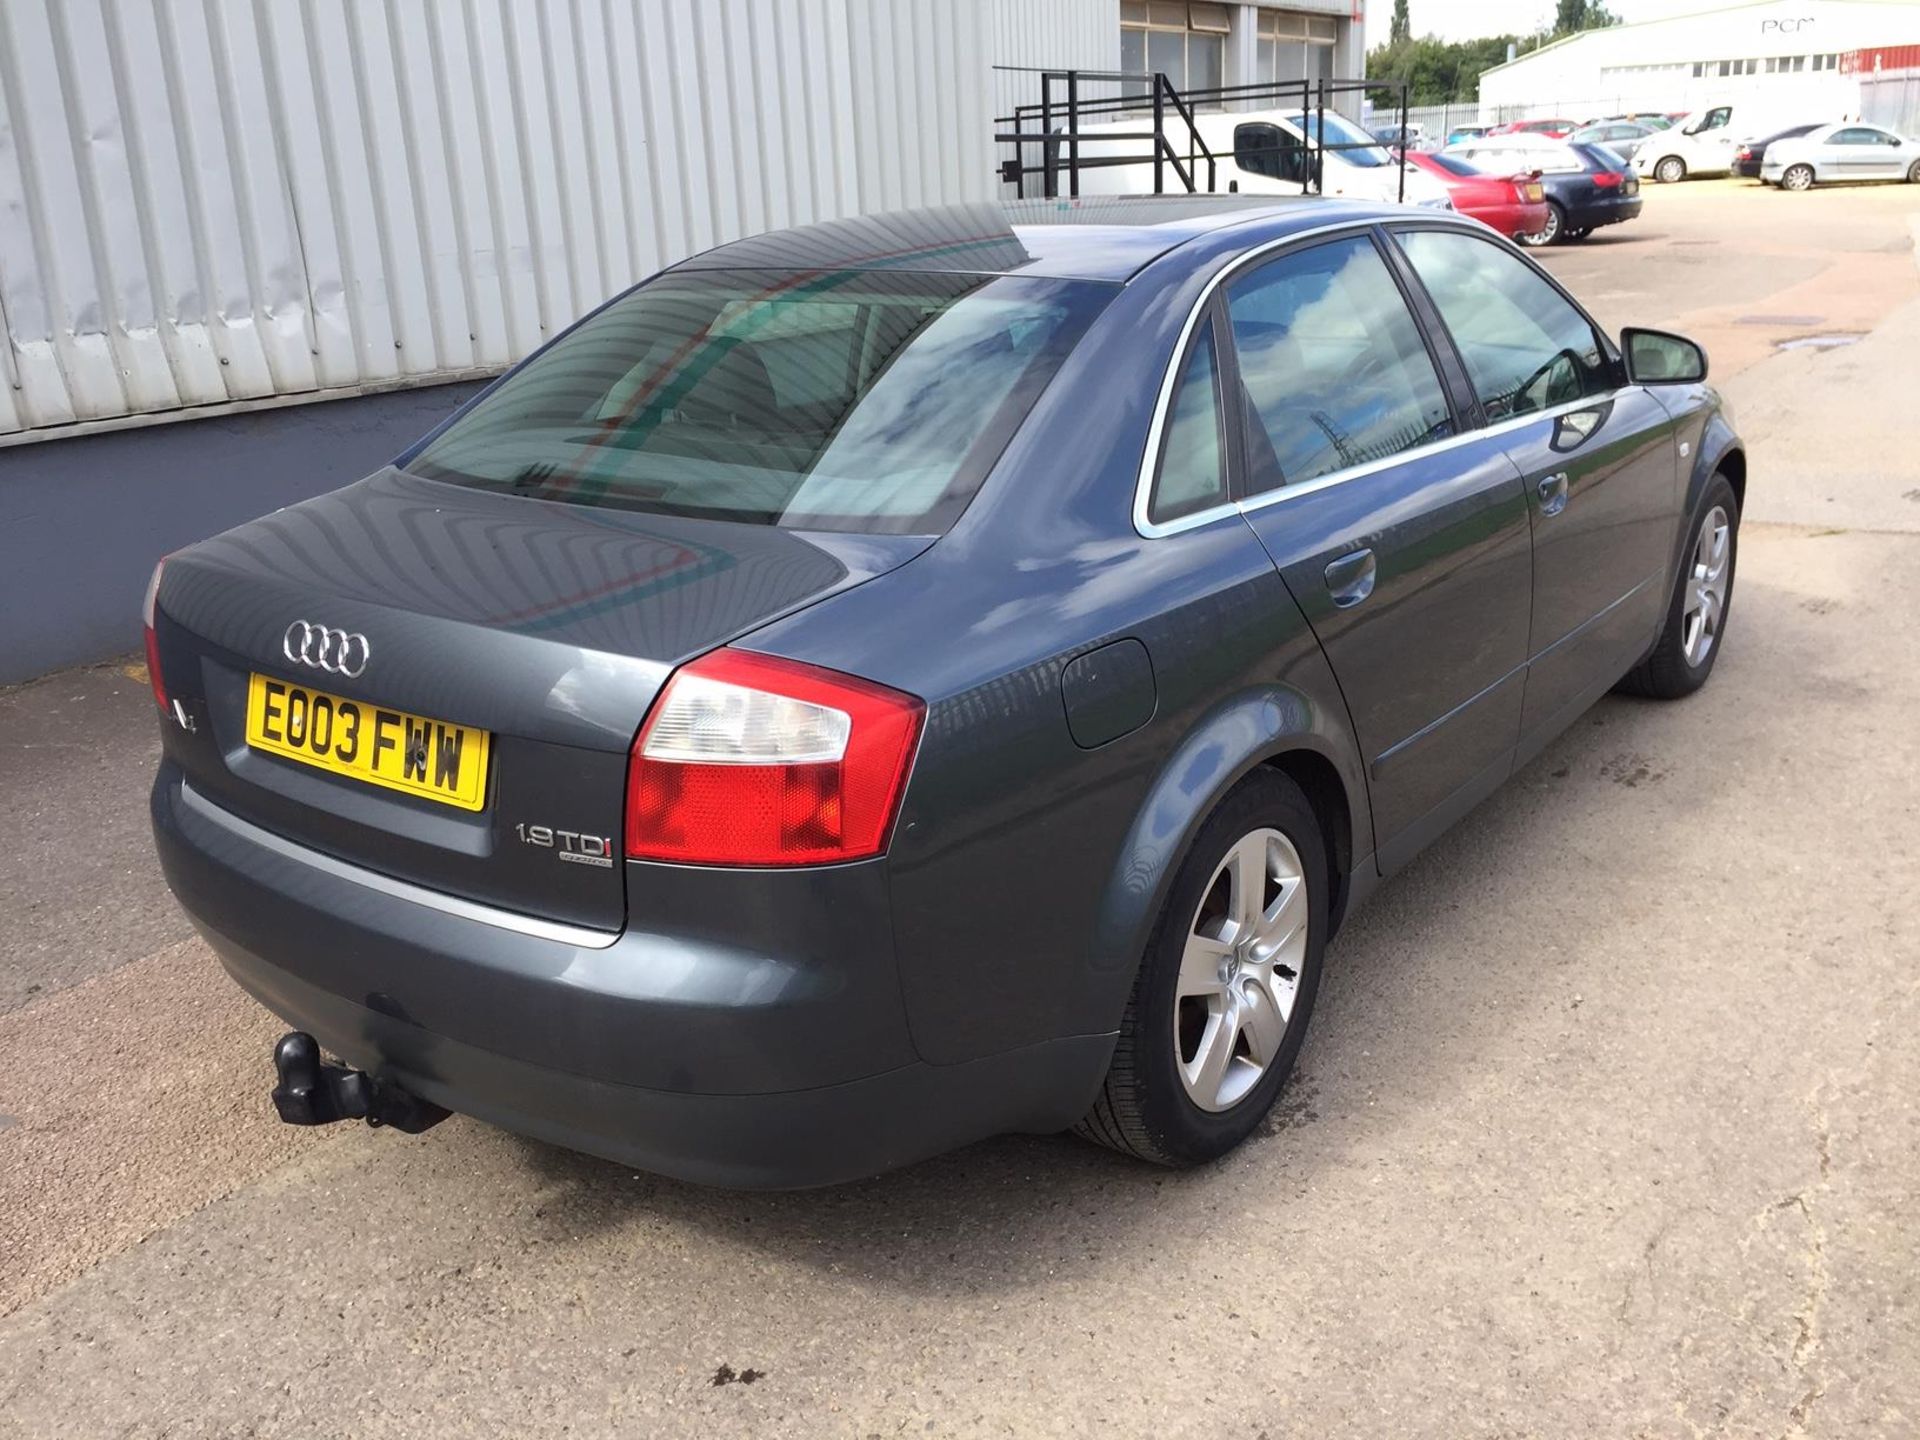 2003 Audi A4 Quattro 1.9 Tdi SE 4 Dr Saloon - CL505 - NO VAT ON THE HAMMER - Location: Corby, Northa - Image 11 of 15